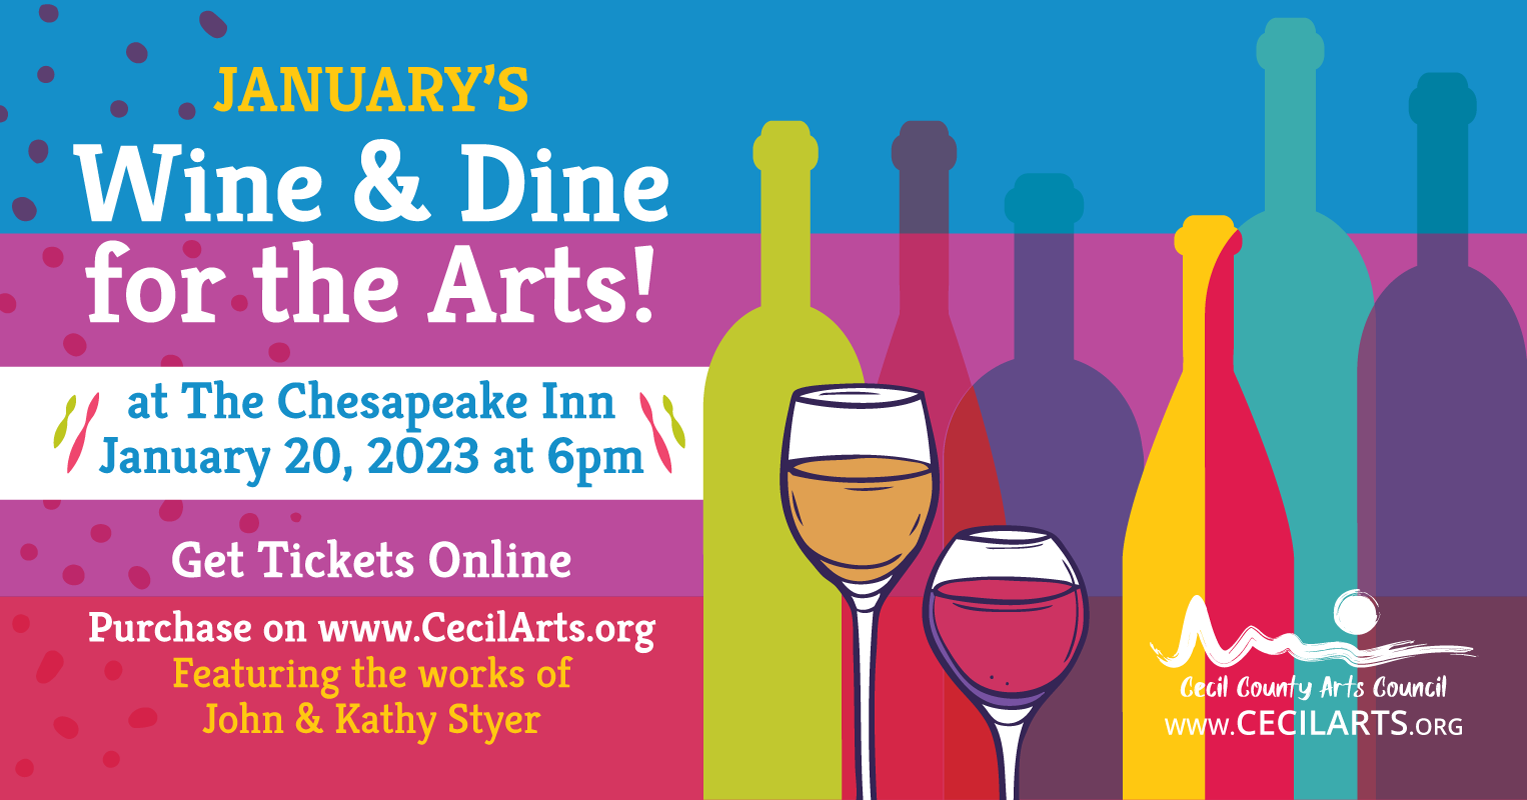 Wine & Dine for the Arts - January